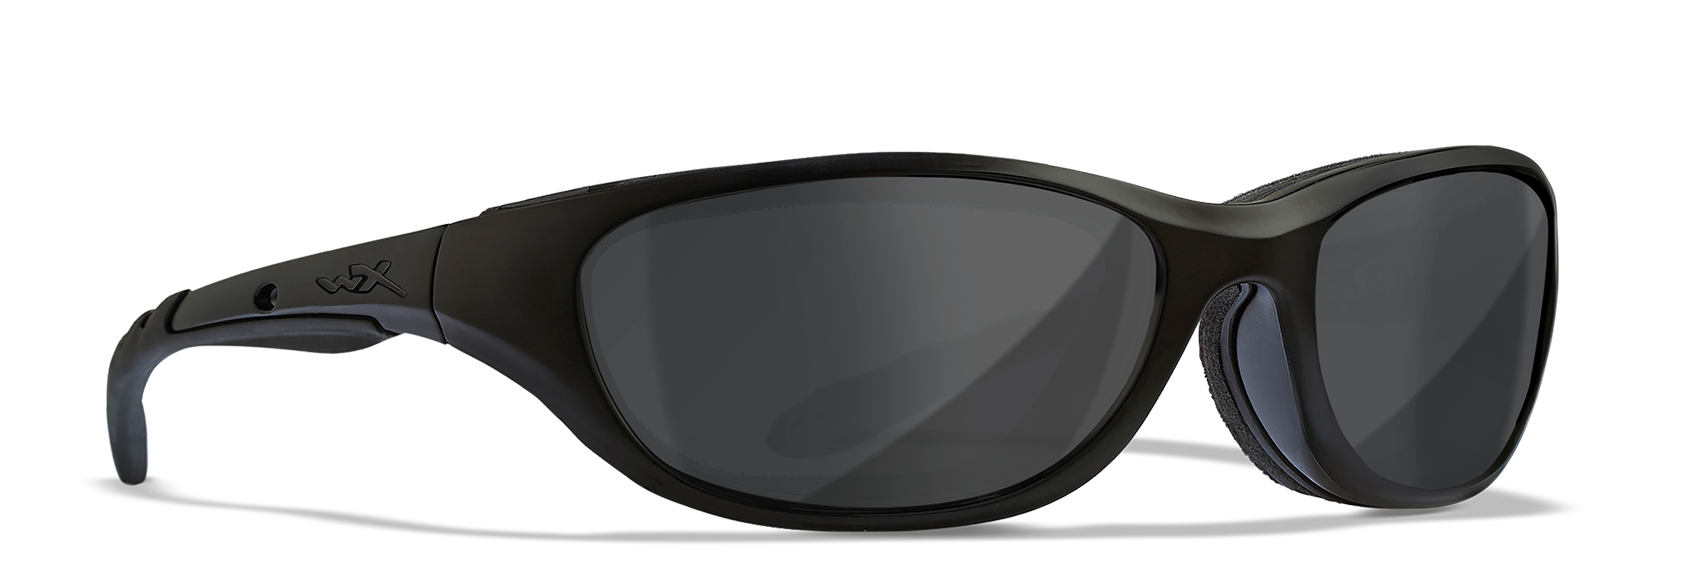 Wiley X Airrage Smoke Gray Lens Polycarbonate Sunglasses